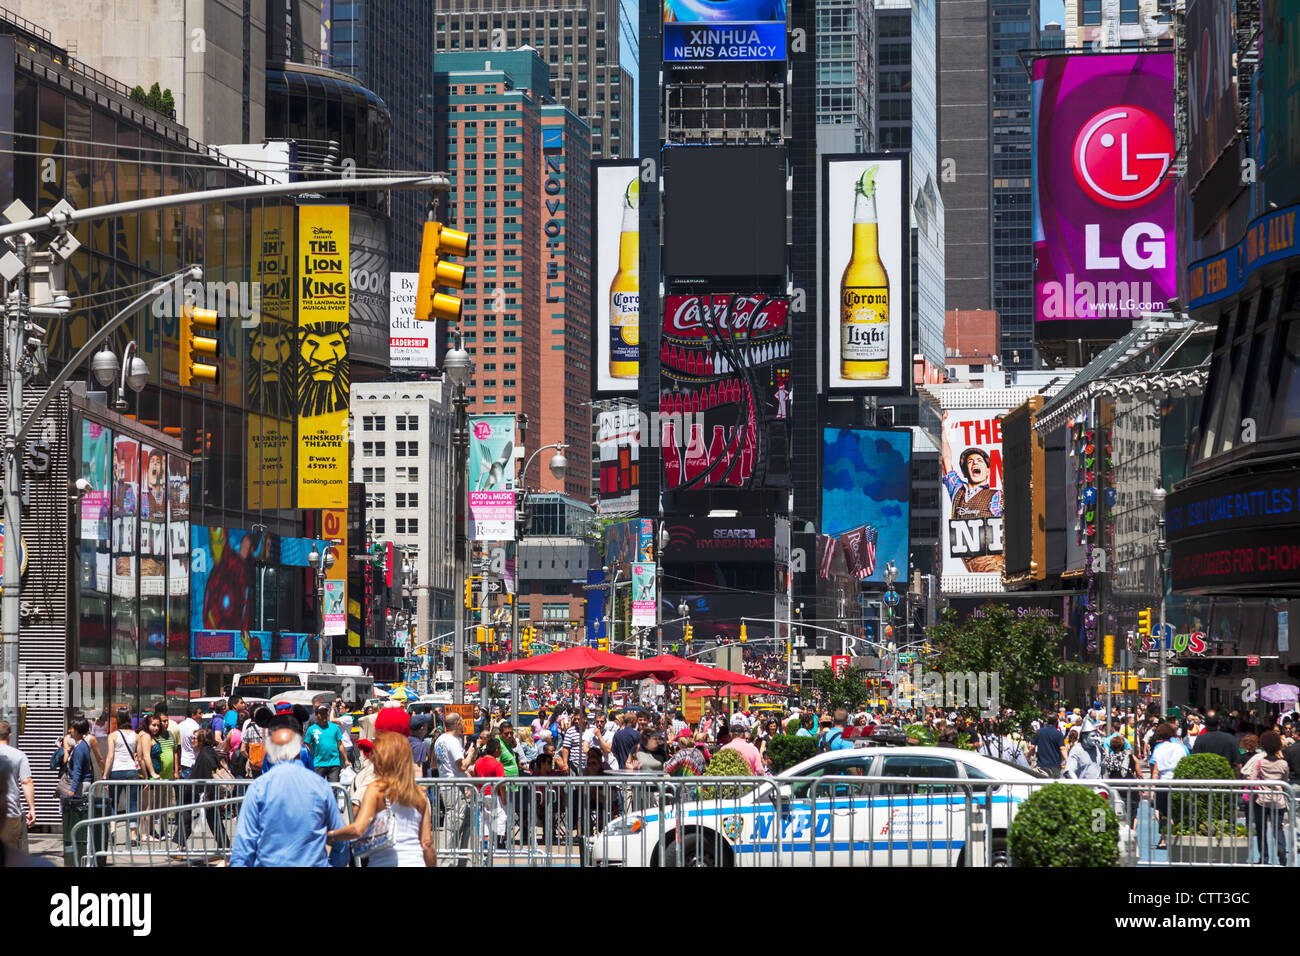 Busy Times Square in Manhattan, New York City, tourists, NYPD, bright lights and advertising hoardings fill the scene Stock Photo